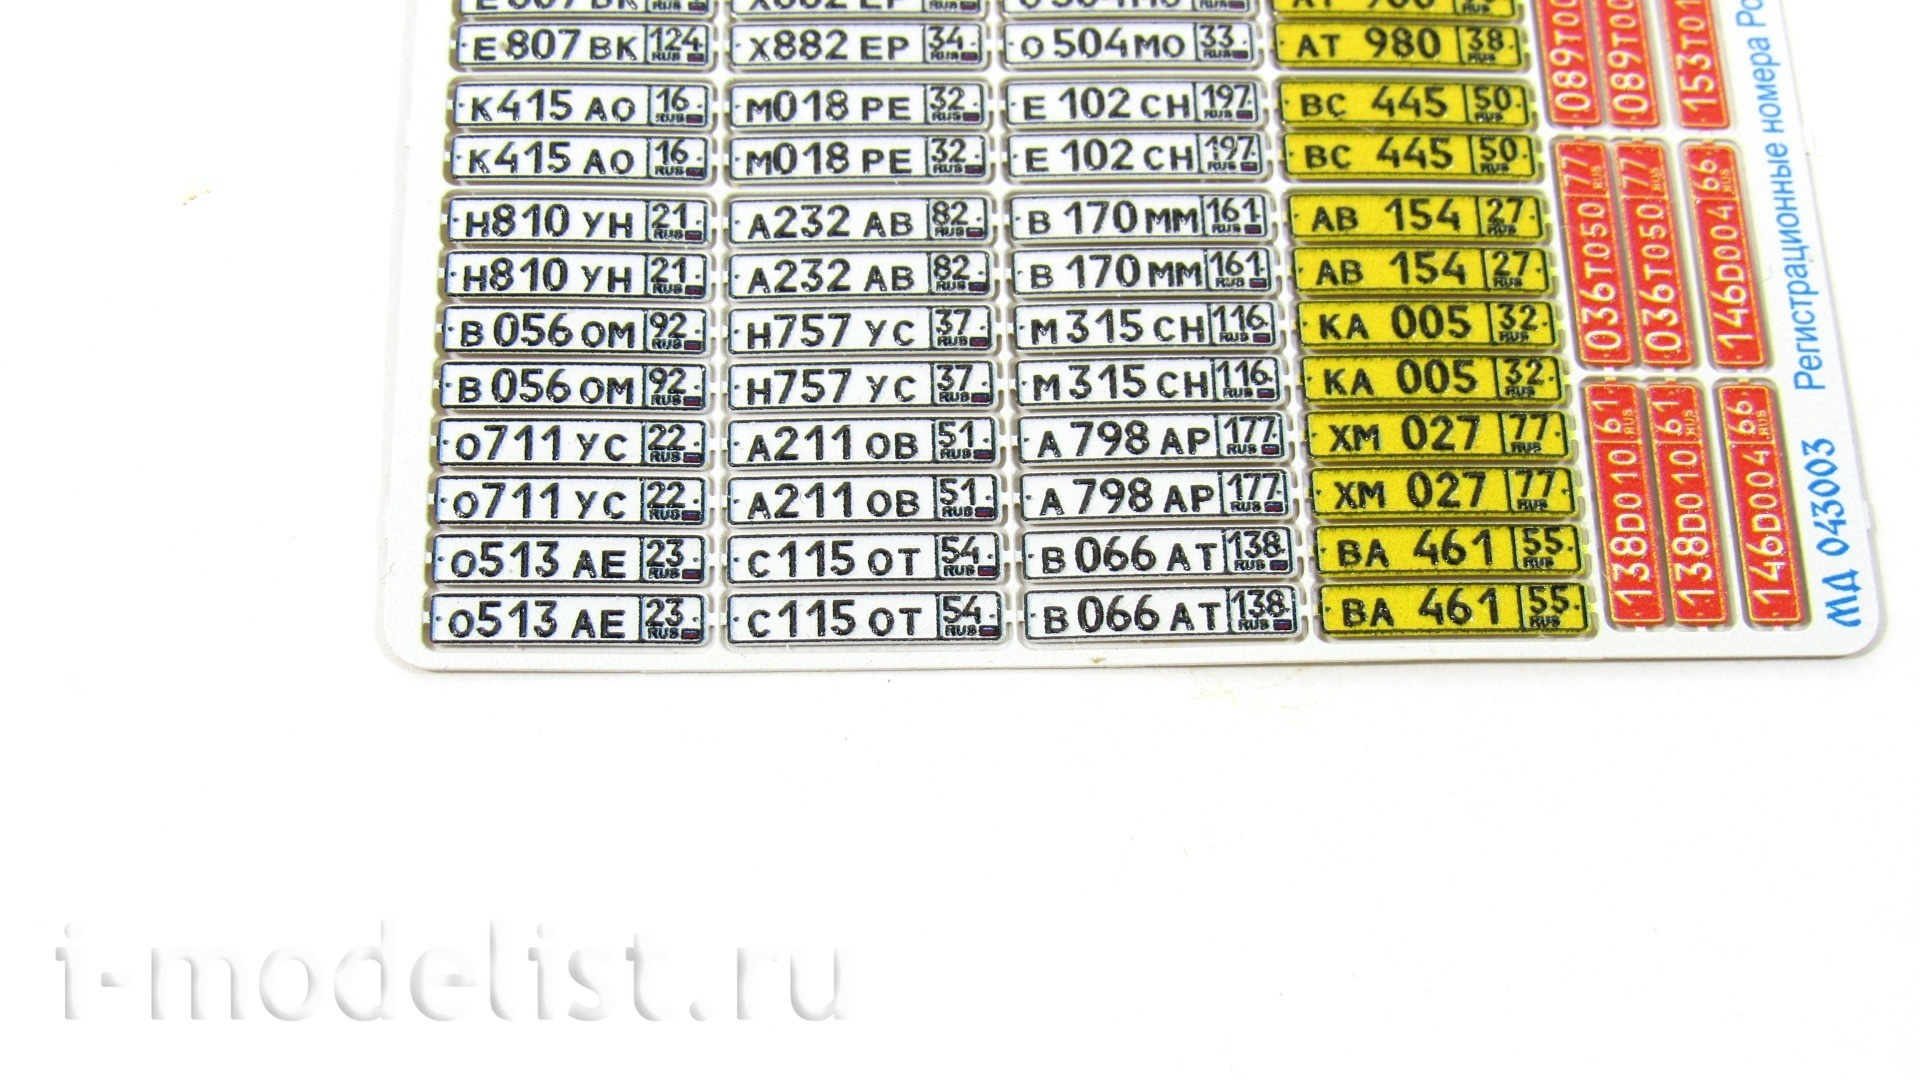 043003 Microdesign 1/43 State numbers of Russia